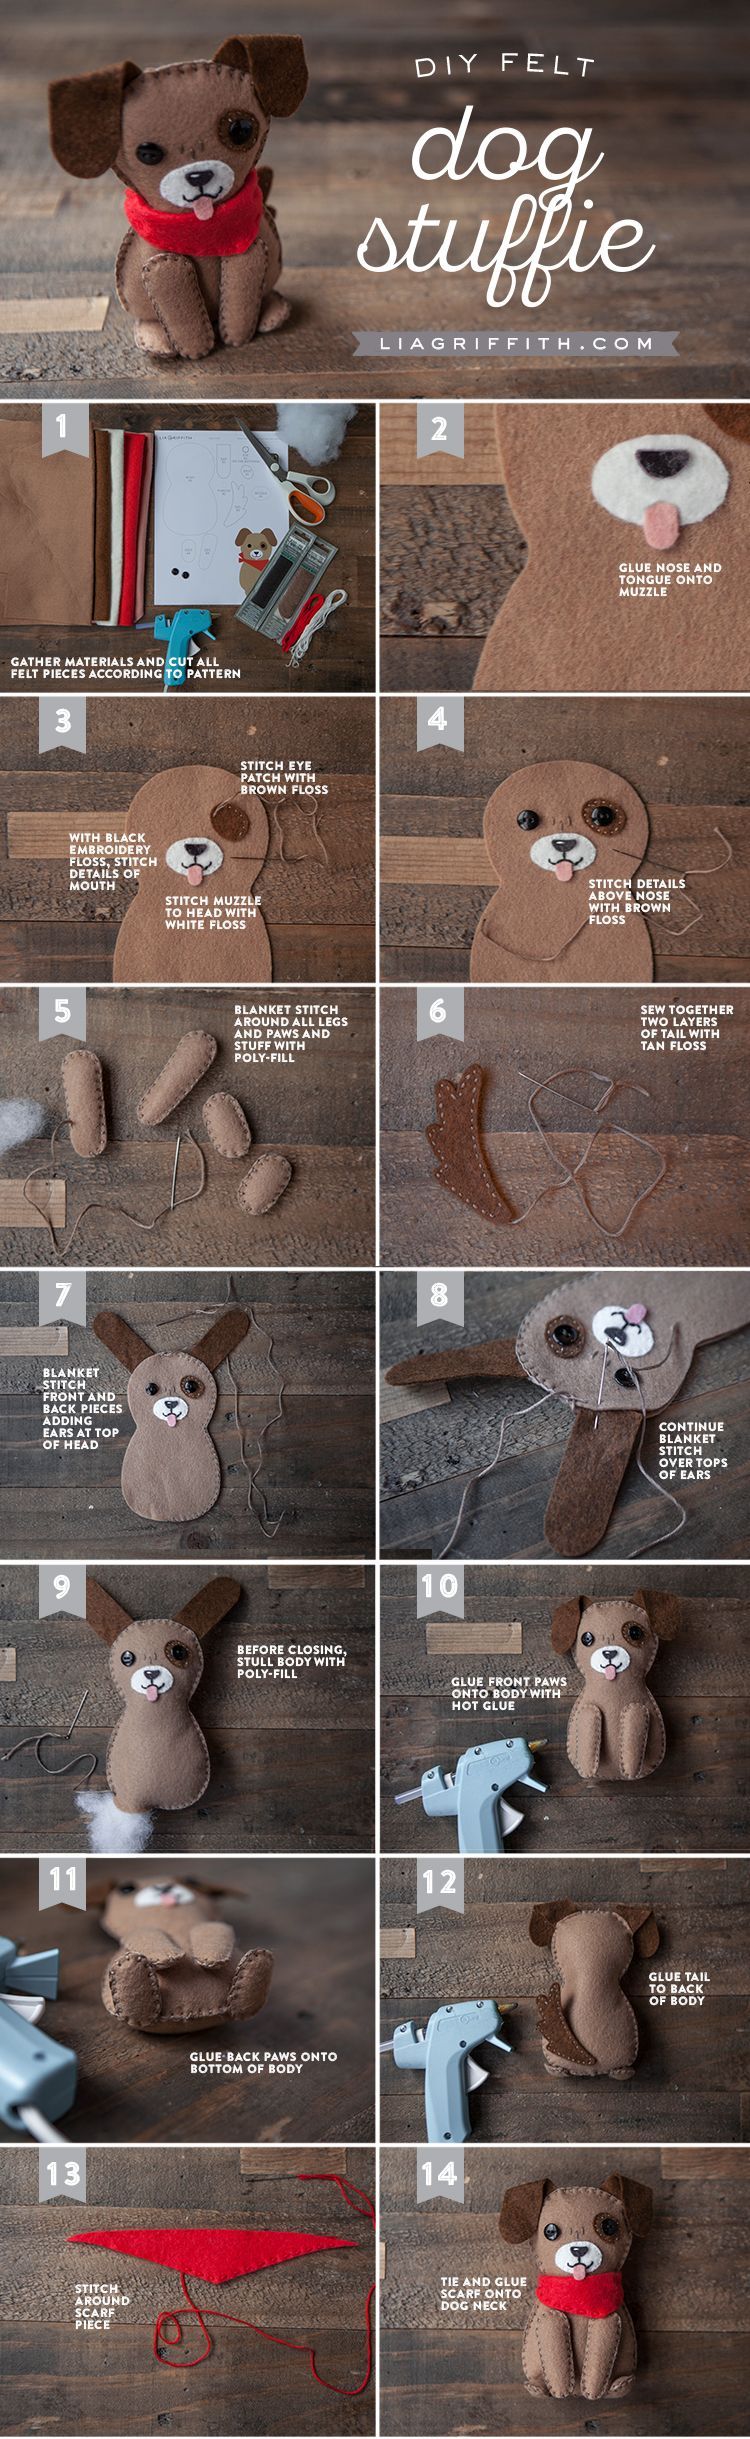 Woof! Want to make the cutest stuffed dog you ever did see? Downloadable pattern and tutorial by handcrafted lifestyle expert Lia